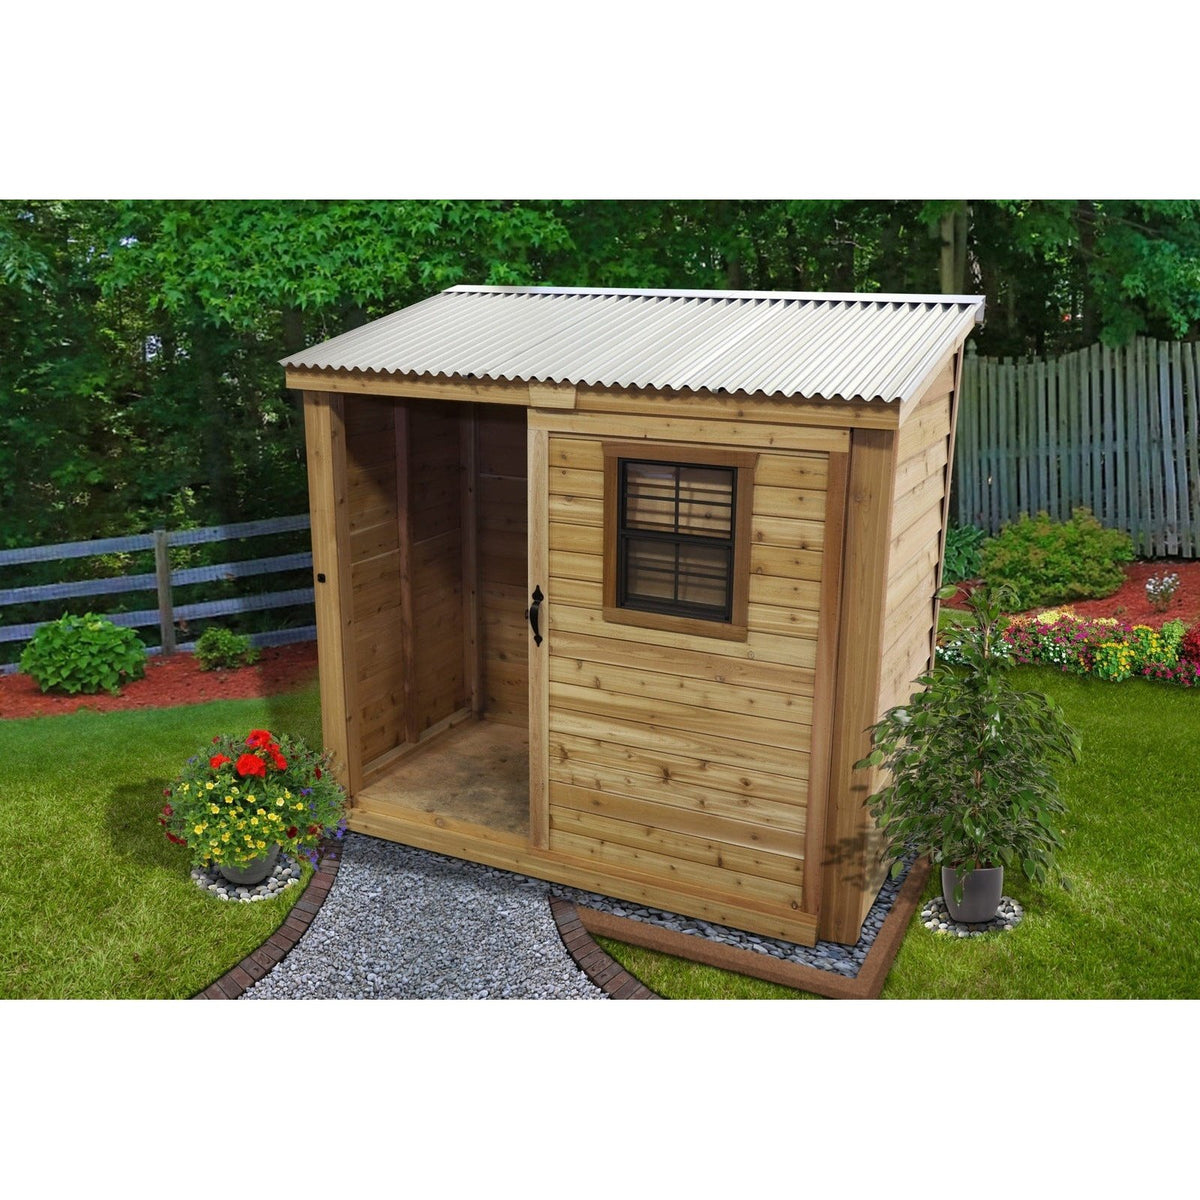 Spacesaver 8x4 with Single Door Metal Architect Knotty by Outdoor Living Today